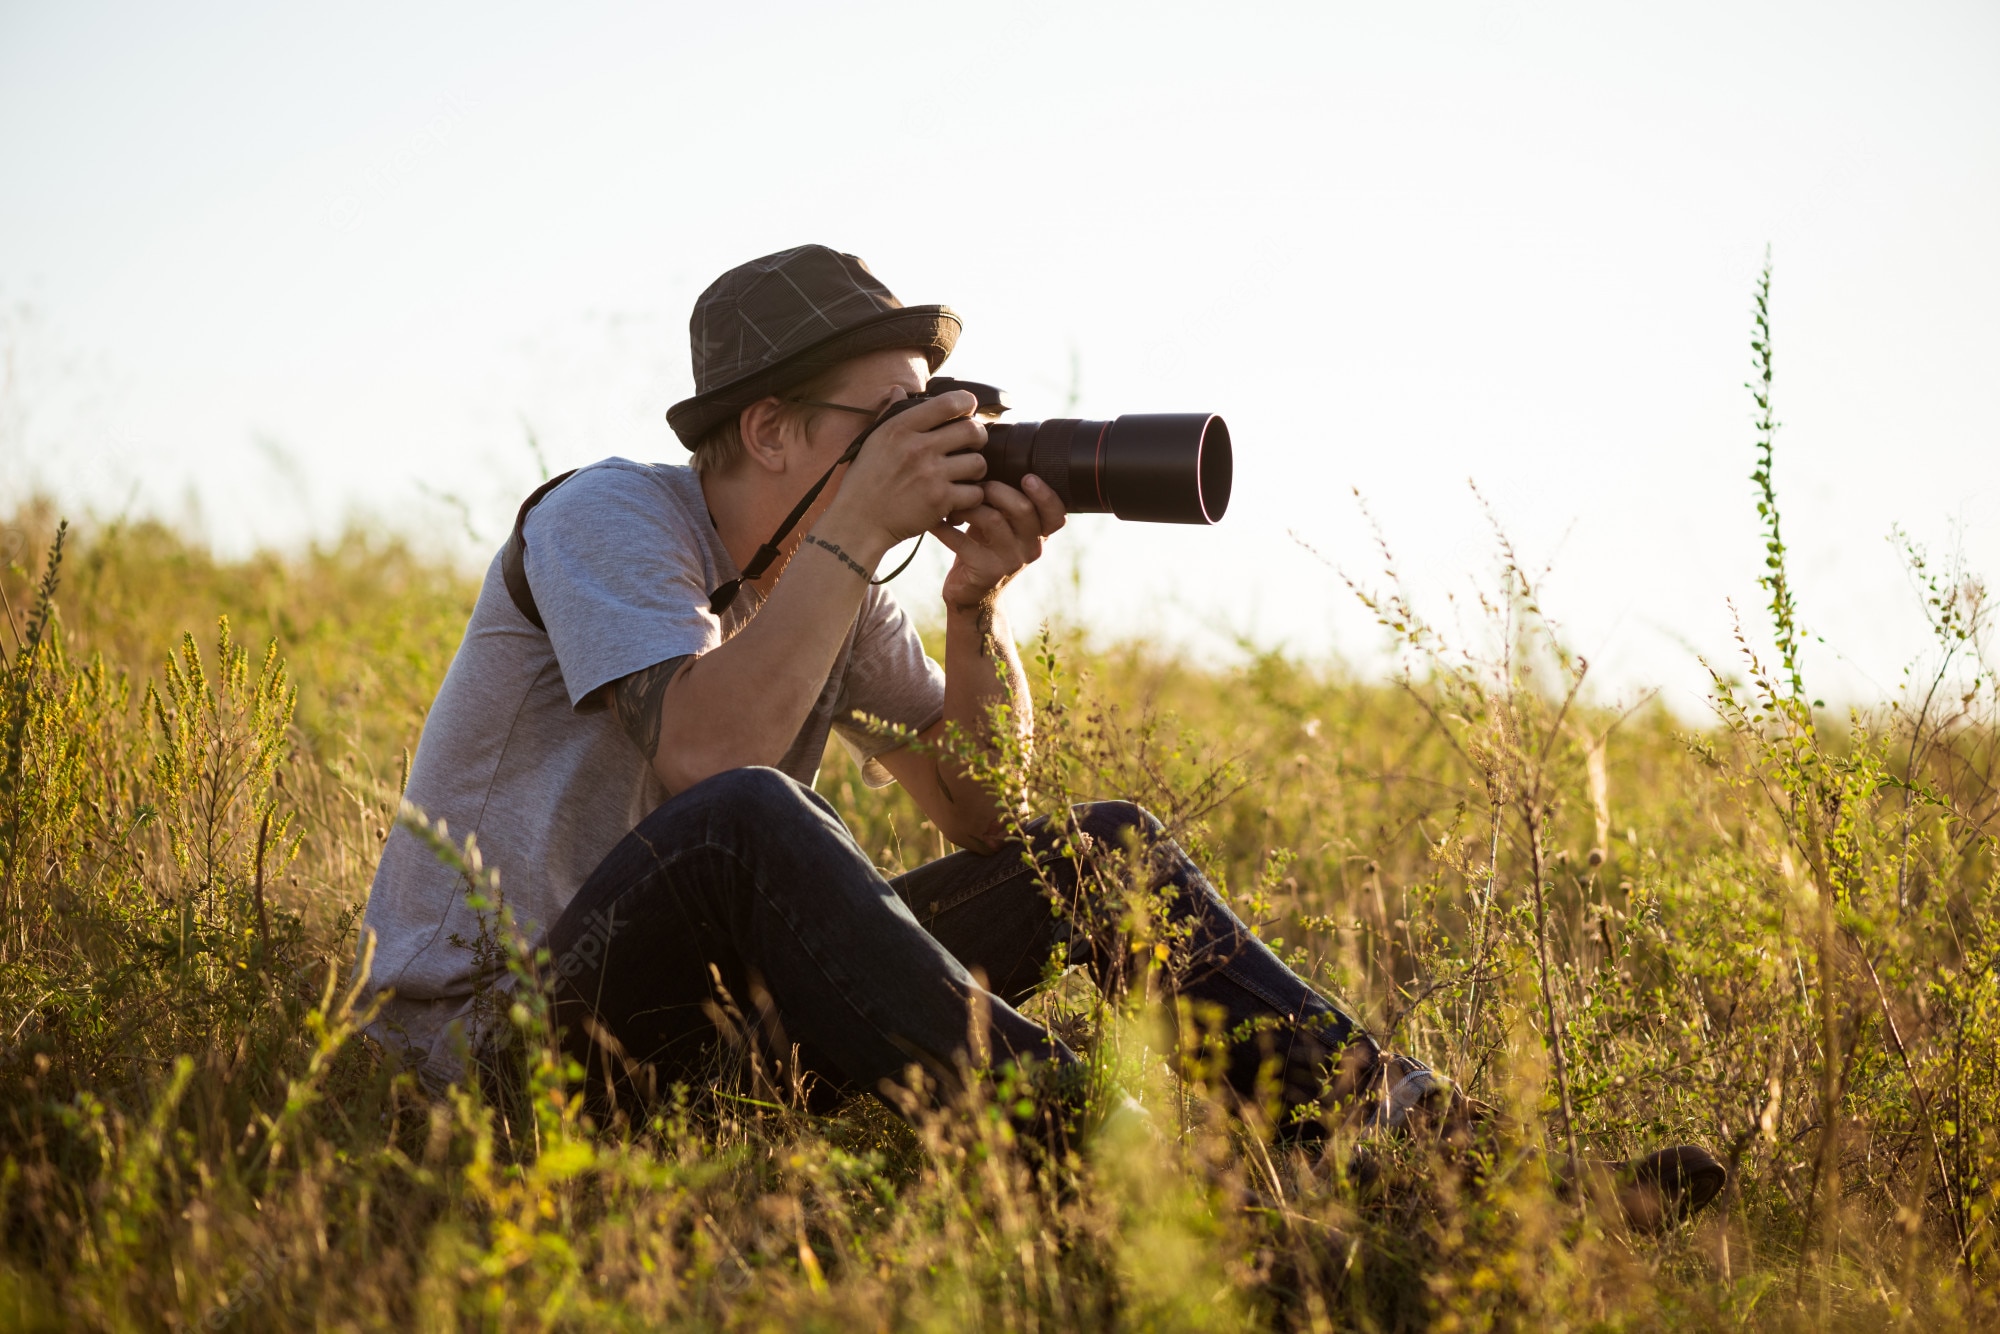 Get Listed in Photographer Directories: